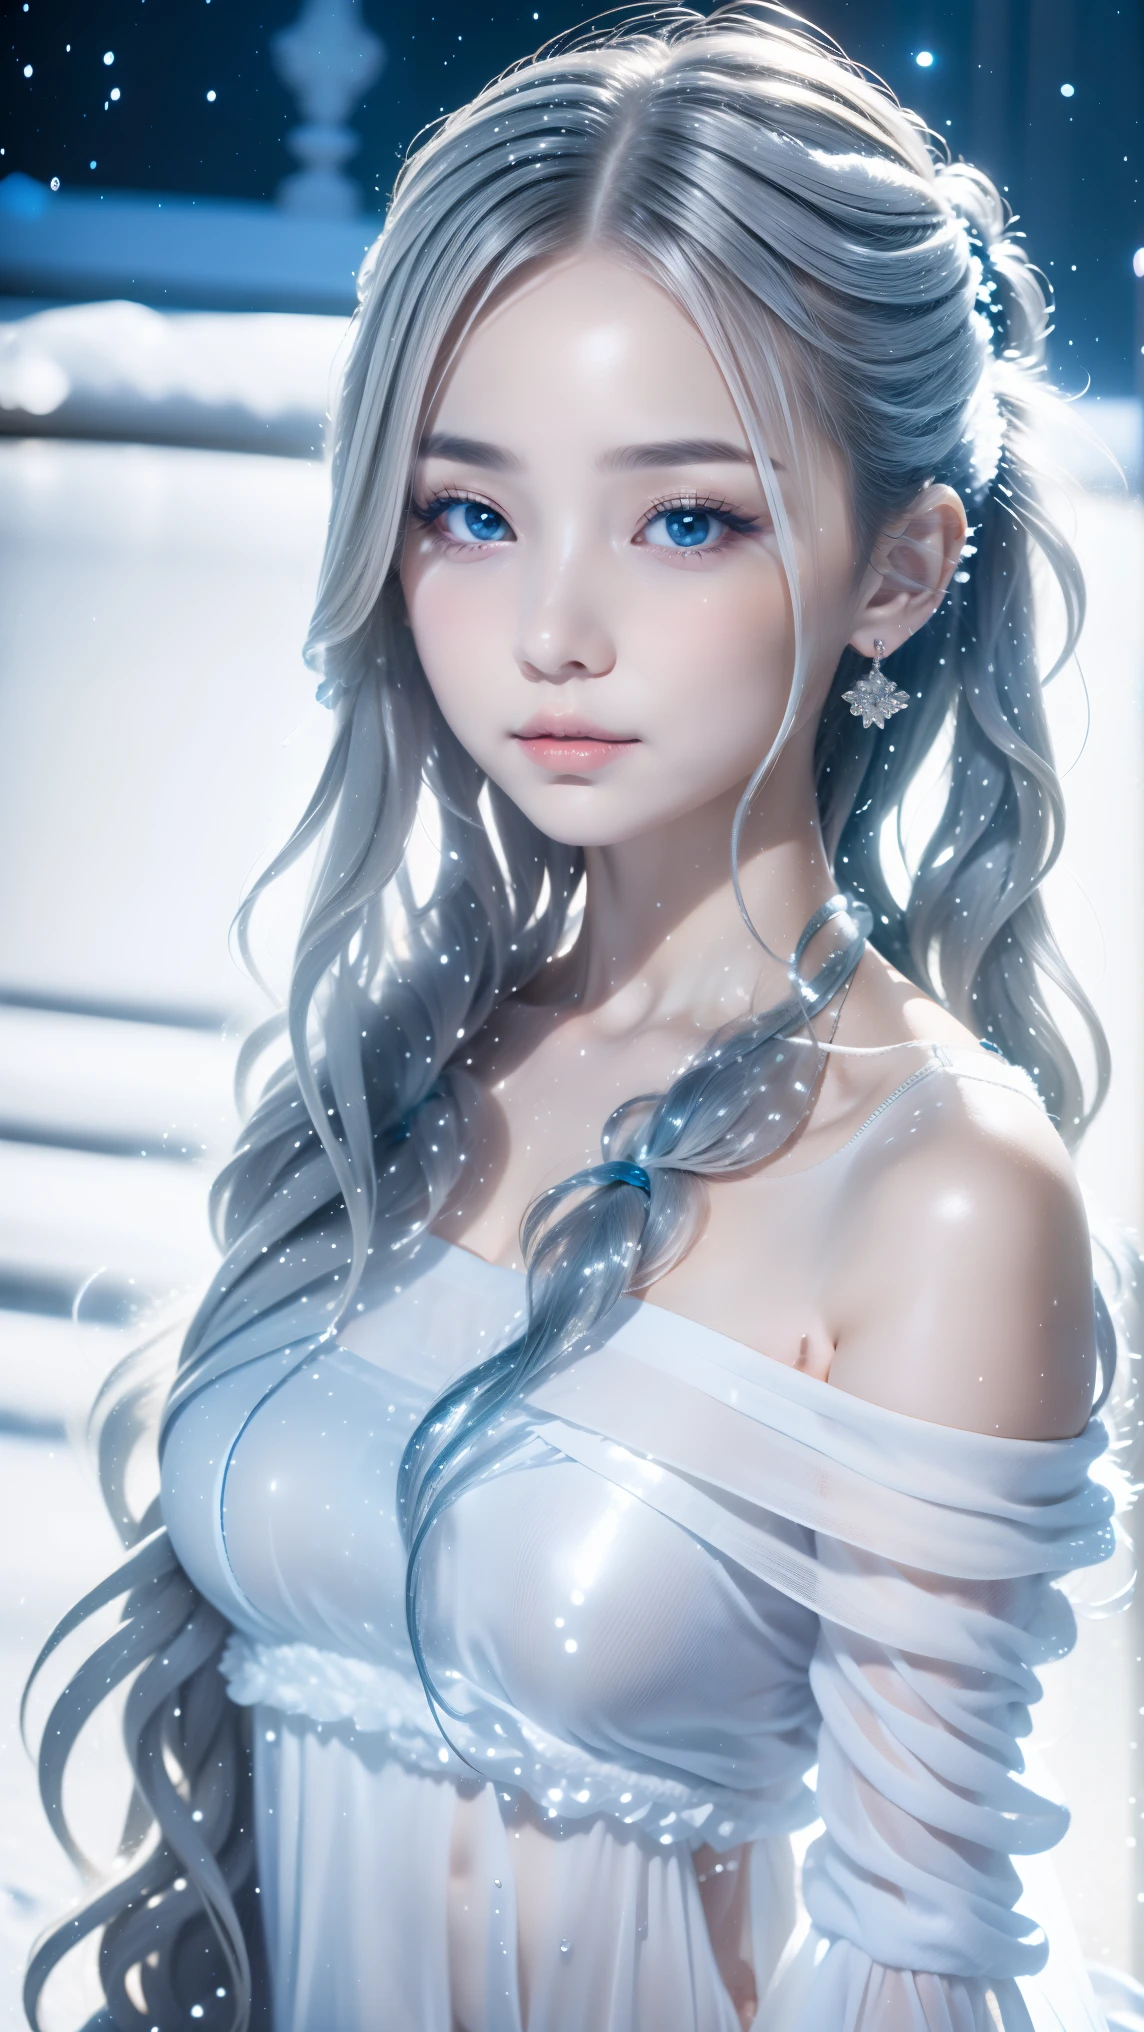 1 girl,(snow,ice), Snowflower, In winter, gray hair, shiny hair, wavy hair, transparent clothes, frills, race, wet clothes, off_shoulder, hair scrunchie,masterpiece, telescope lens, absurd, exquisite features